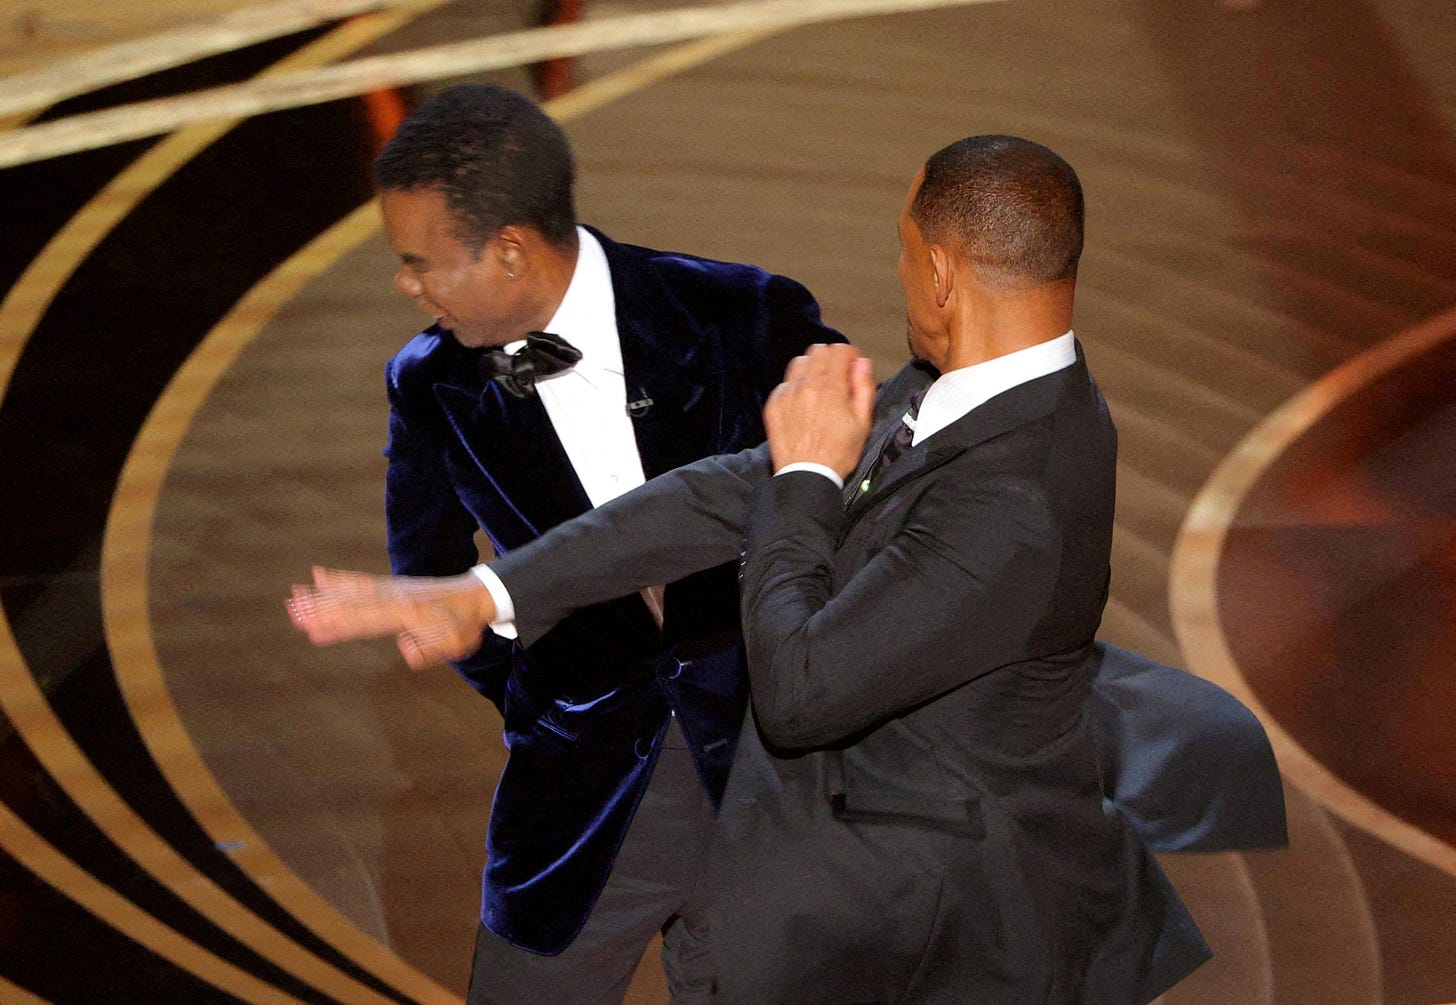 Chris Rock unleashes on Will Smith and wife Jada a year after Oscars slap |  Reuters